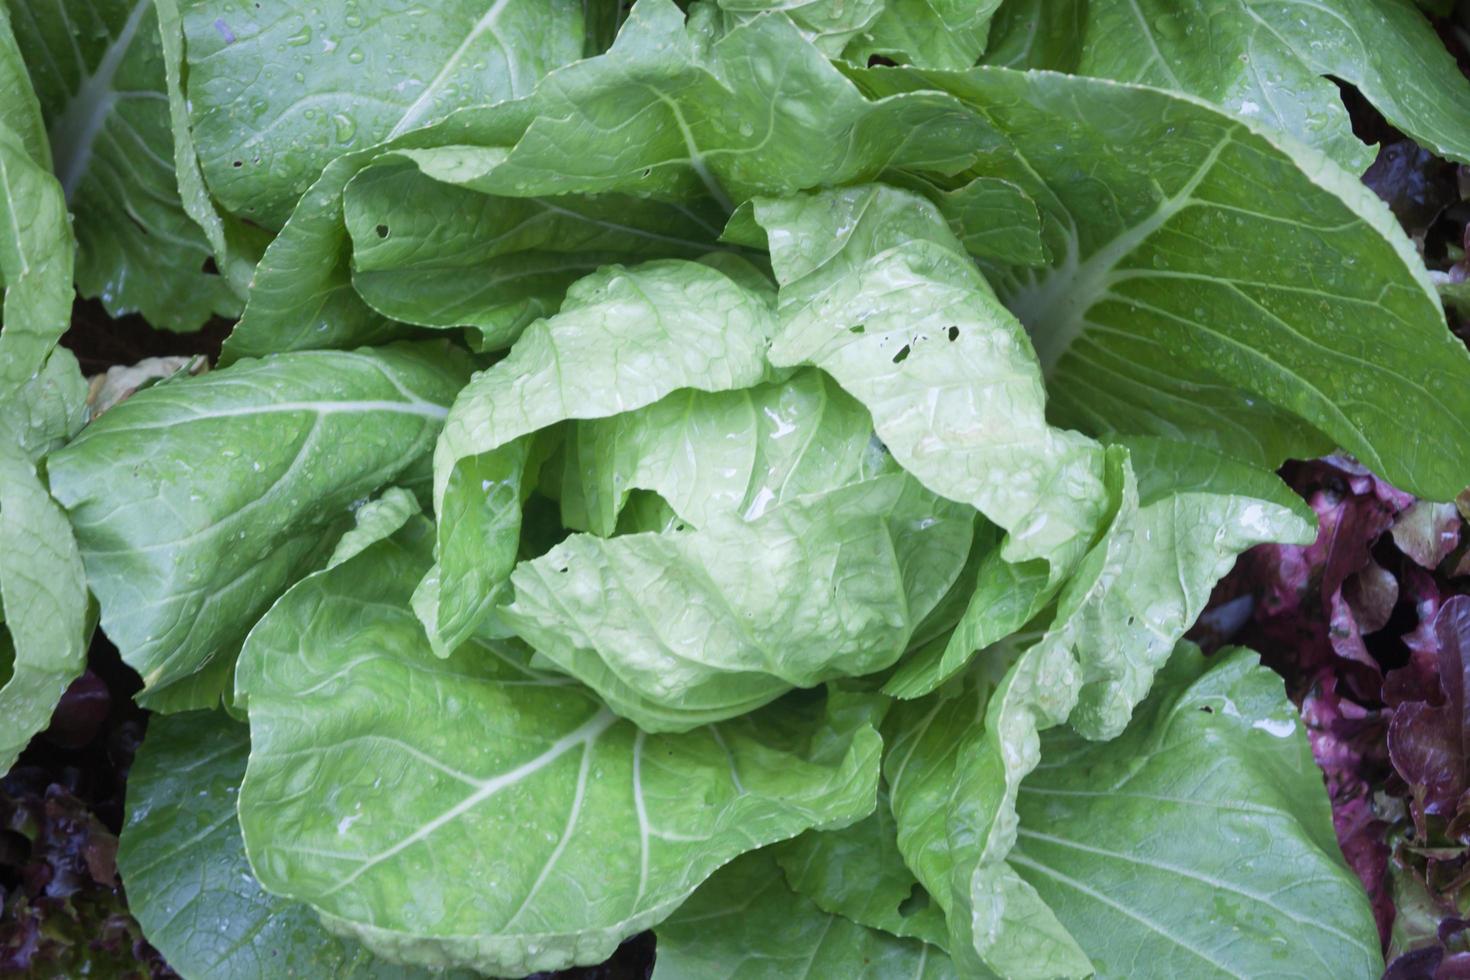 Close-up of a head of cabbage photo